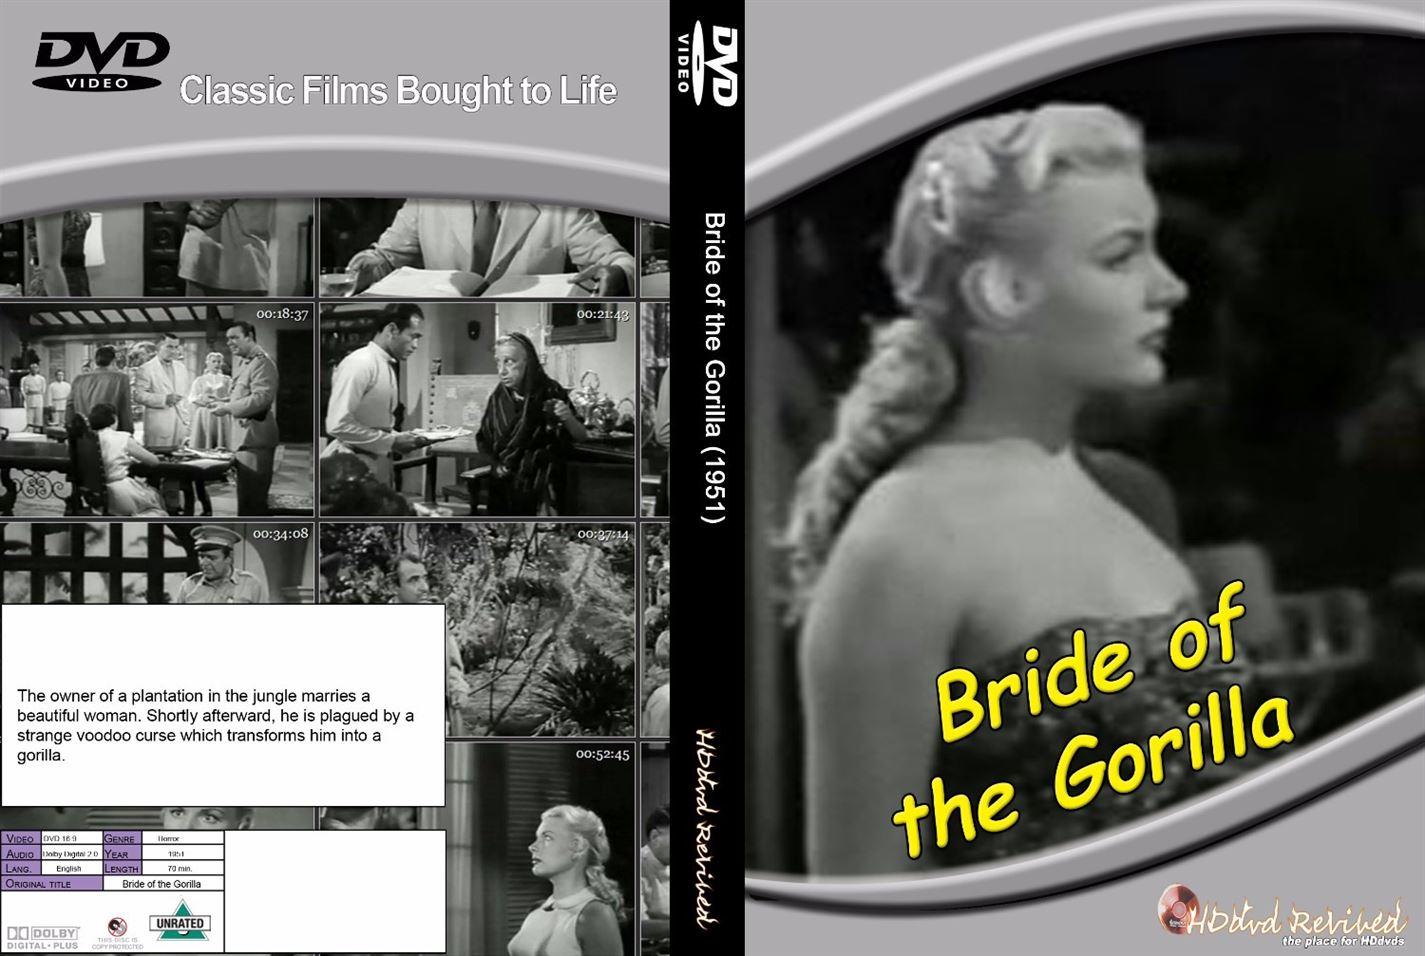 Bride of the Gorilla (1951) - DVD - (HDDVD-Revived)